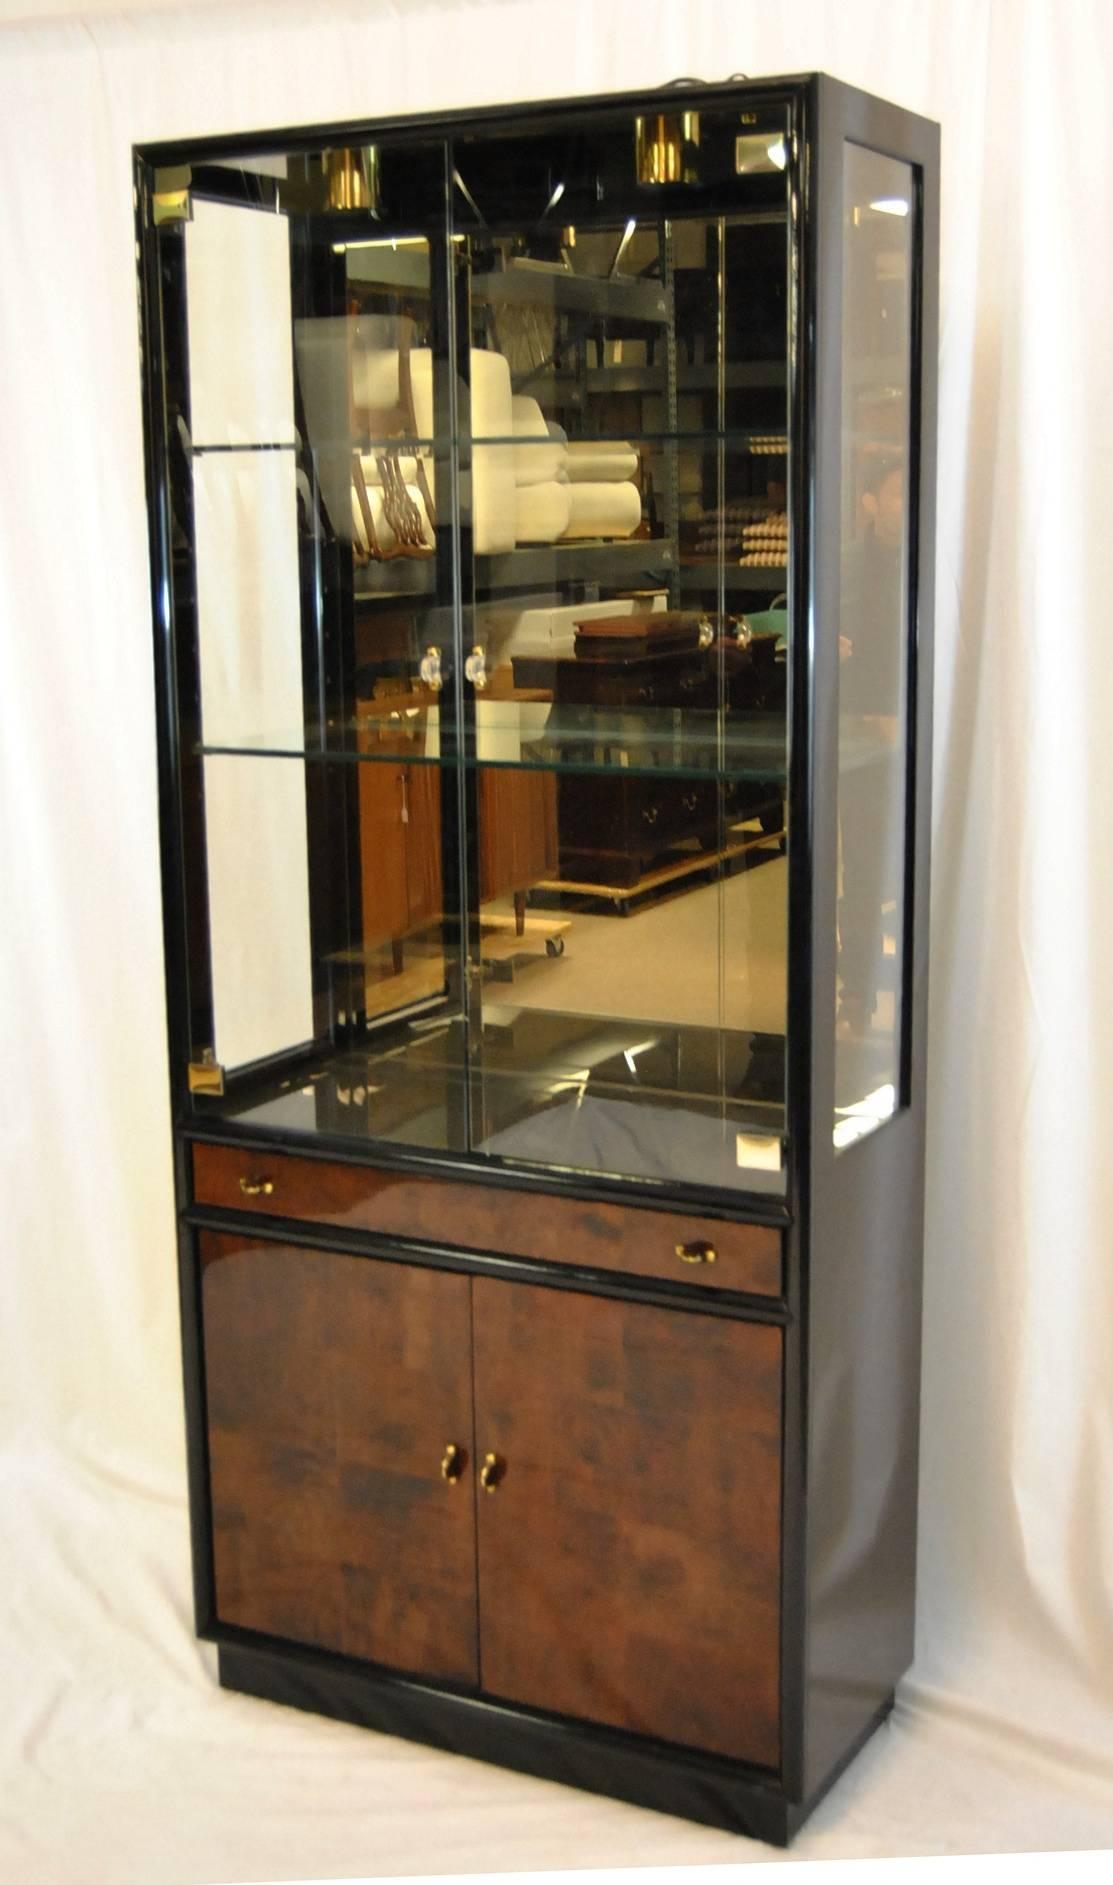 A beautiful display cabinet by Henredon as part of their Scene Three. The cabinet is black lacquer with myrtle burl drawer and door fronts. The glass display top has double doors which open to a mirrored back with two adjustable glass shelves. The